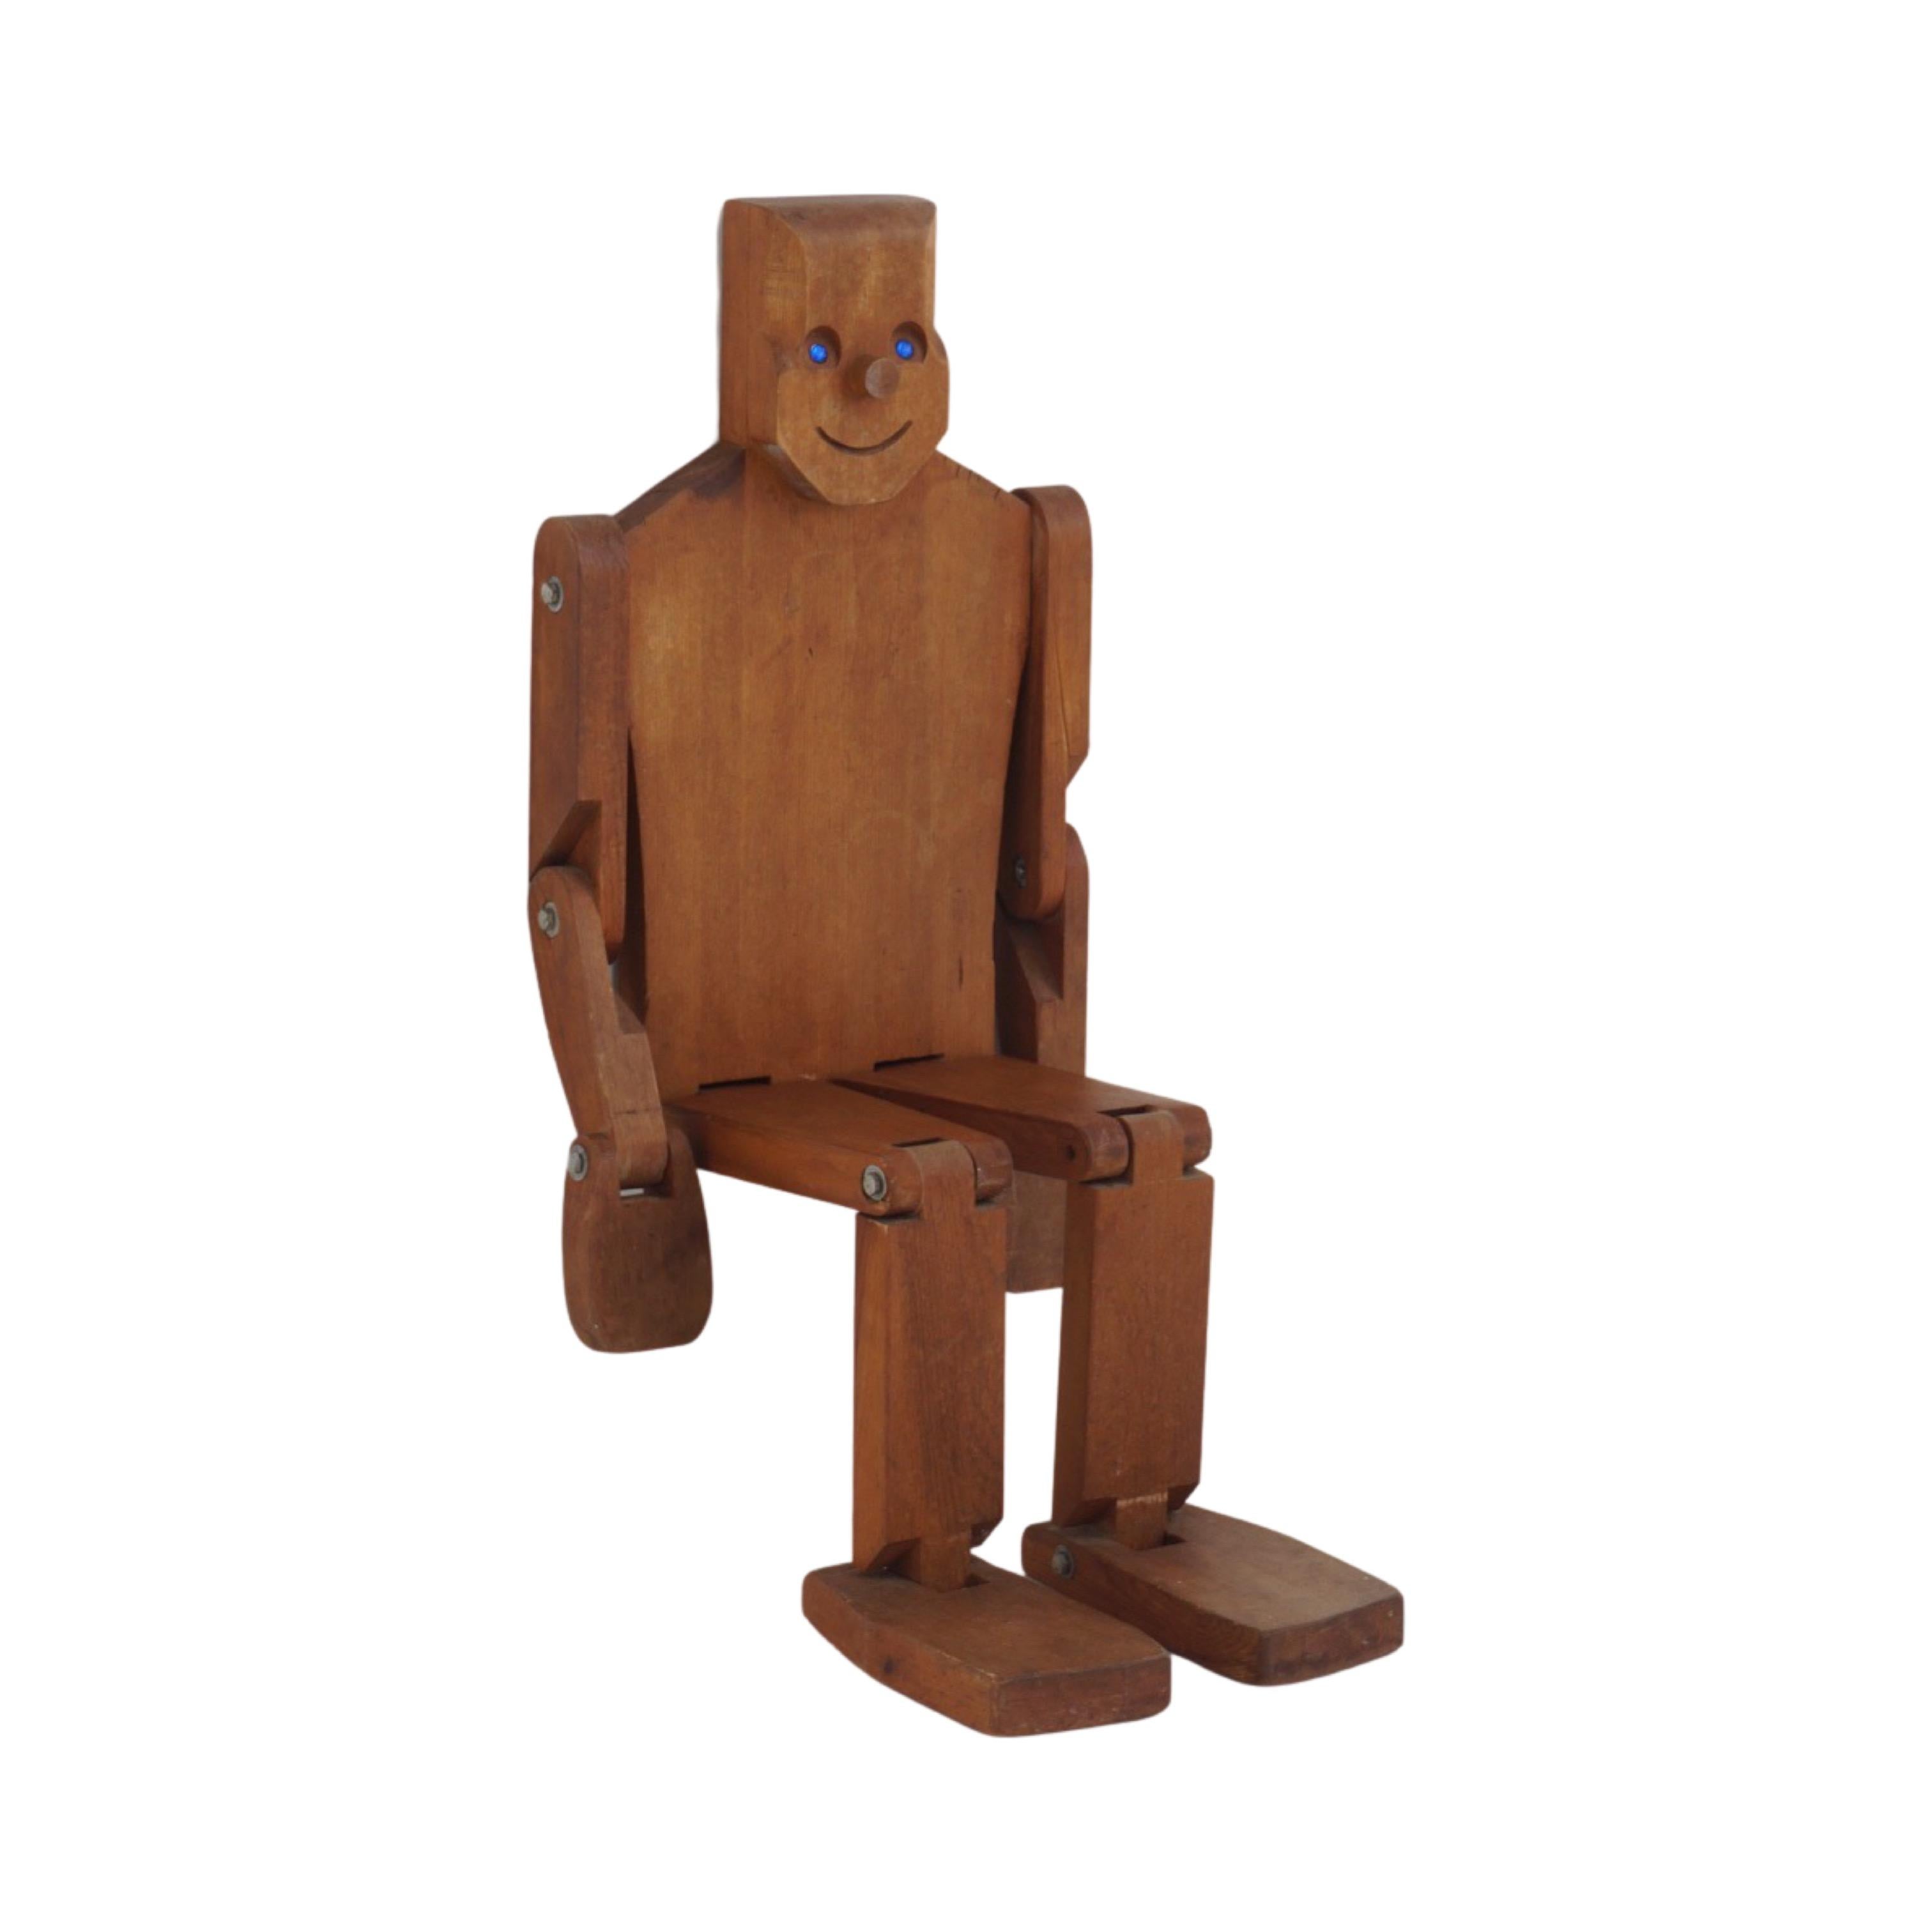 Articulated Wood Figure by Don Ellefson, 1980s For Sale 1